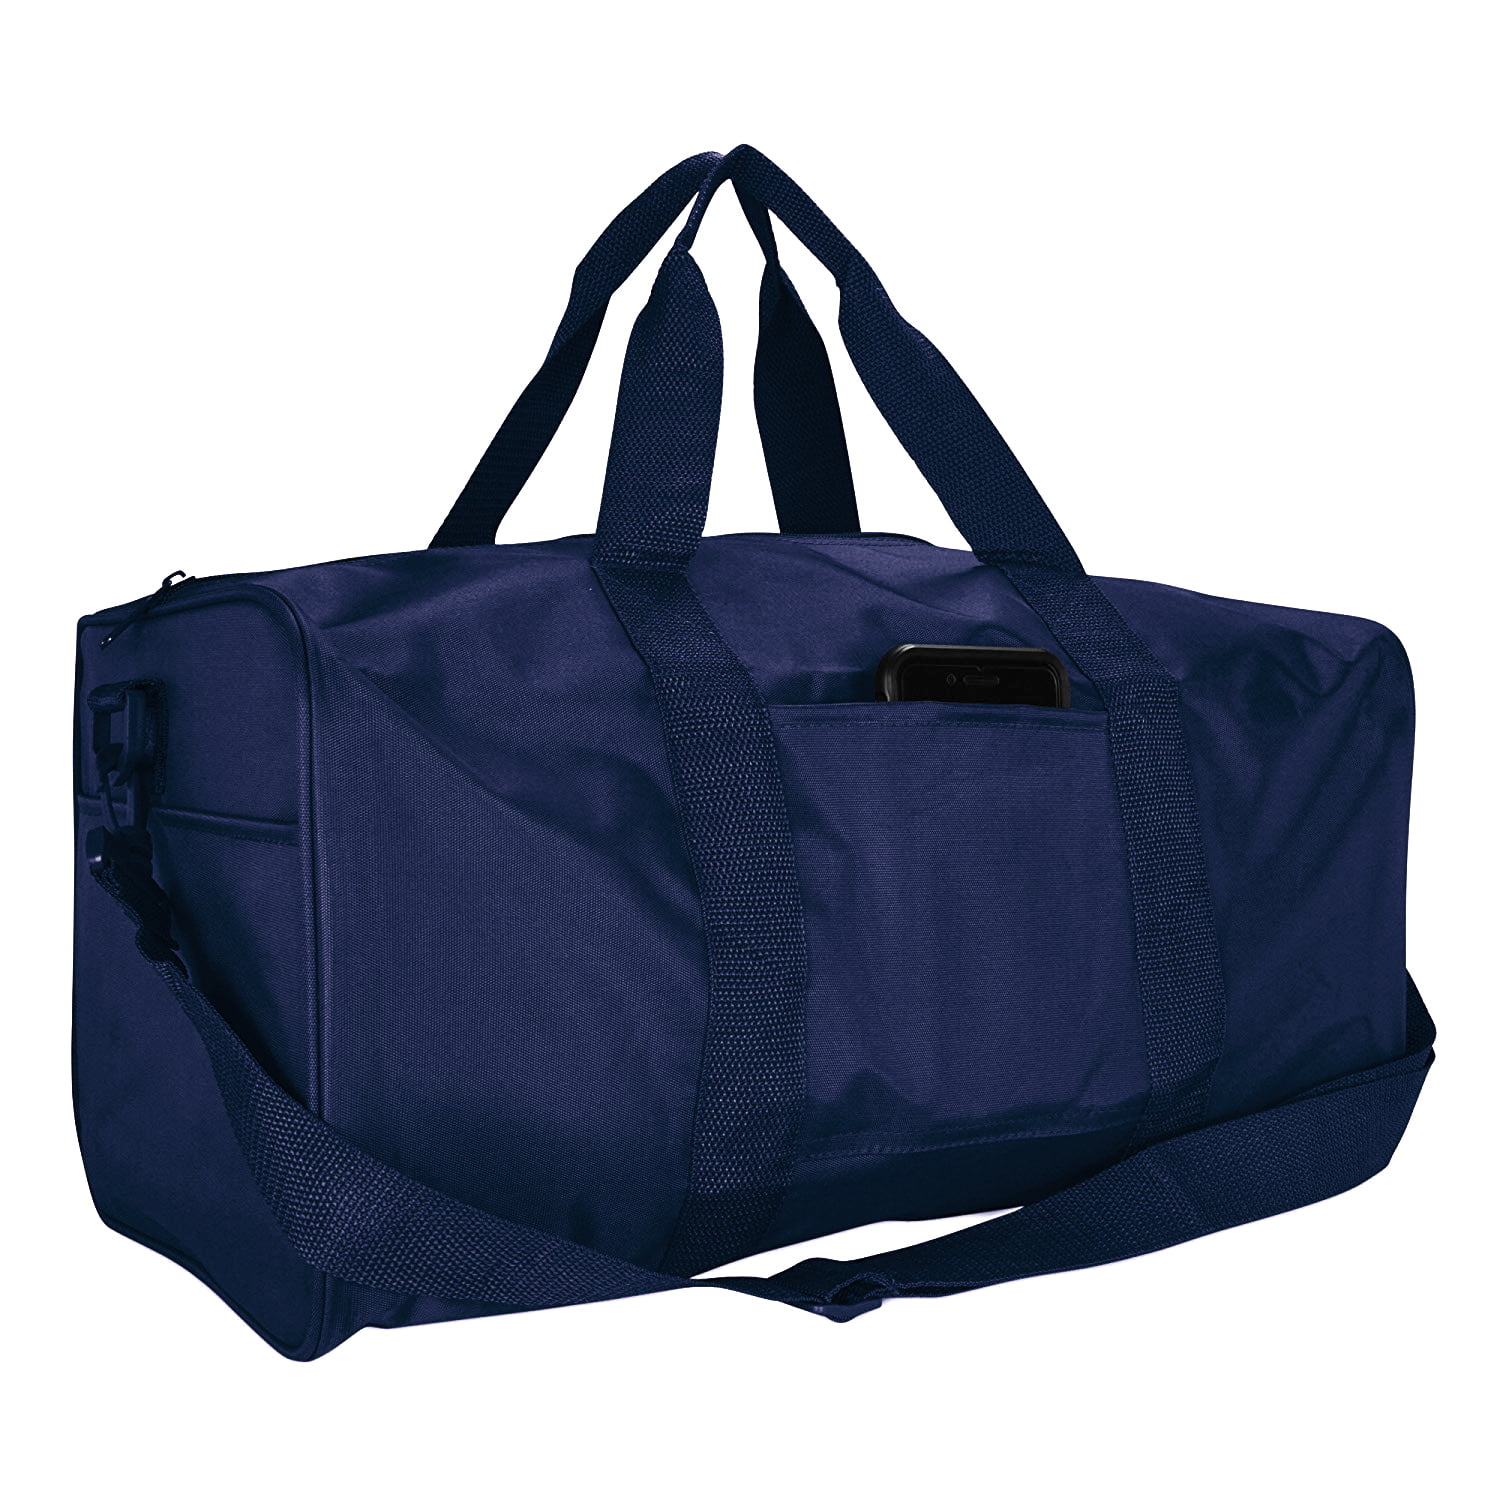 GYM BAG ~ POCKETS & ADJ STRAP Details about   CLEARANCE ~ SUPER LIGHT WEIGHT NYLON DUFFLE